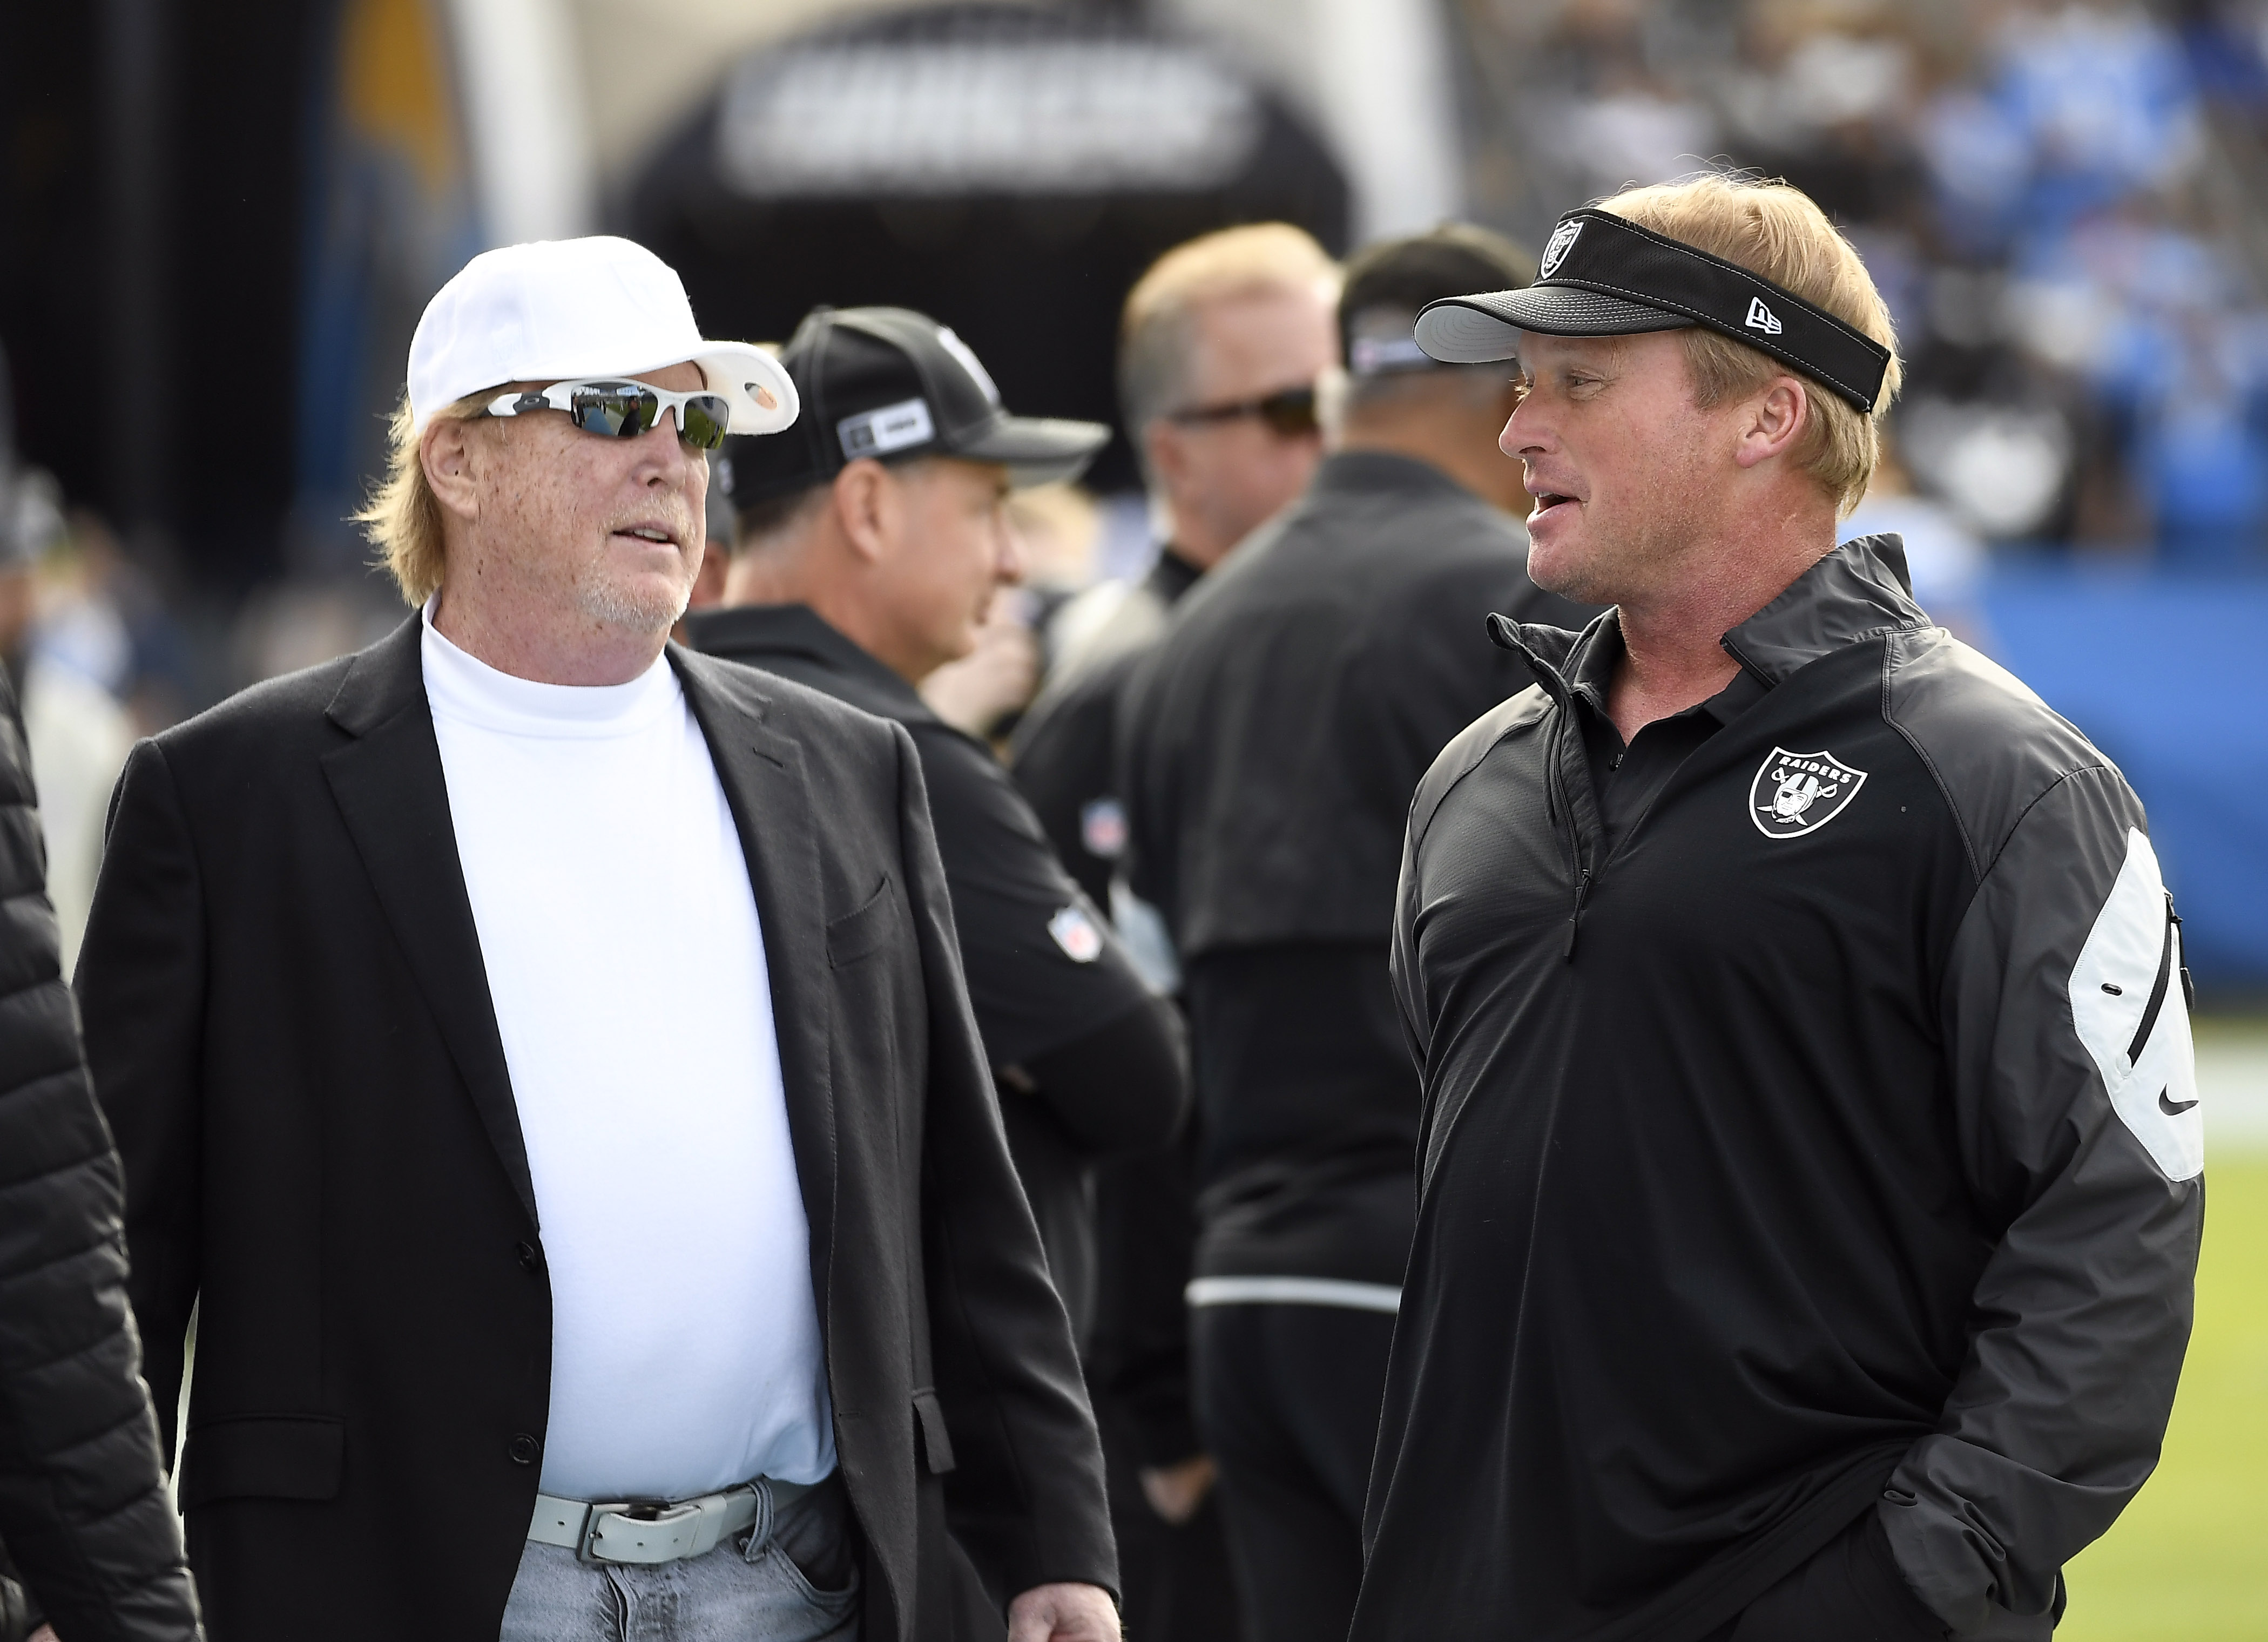 Raiders Rumors: Mark Davis Thinks NFL Is 'Out to Get Him'; 'He Thinks It's a Hit Job' | Bleacher Report | Latest News, Videos and Highlights